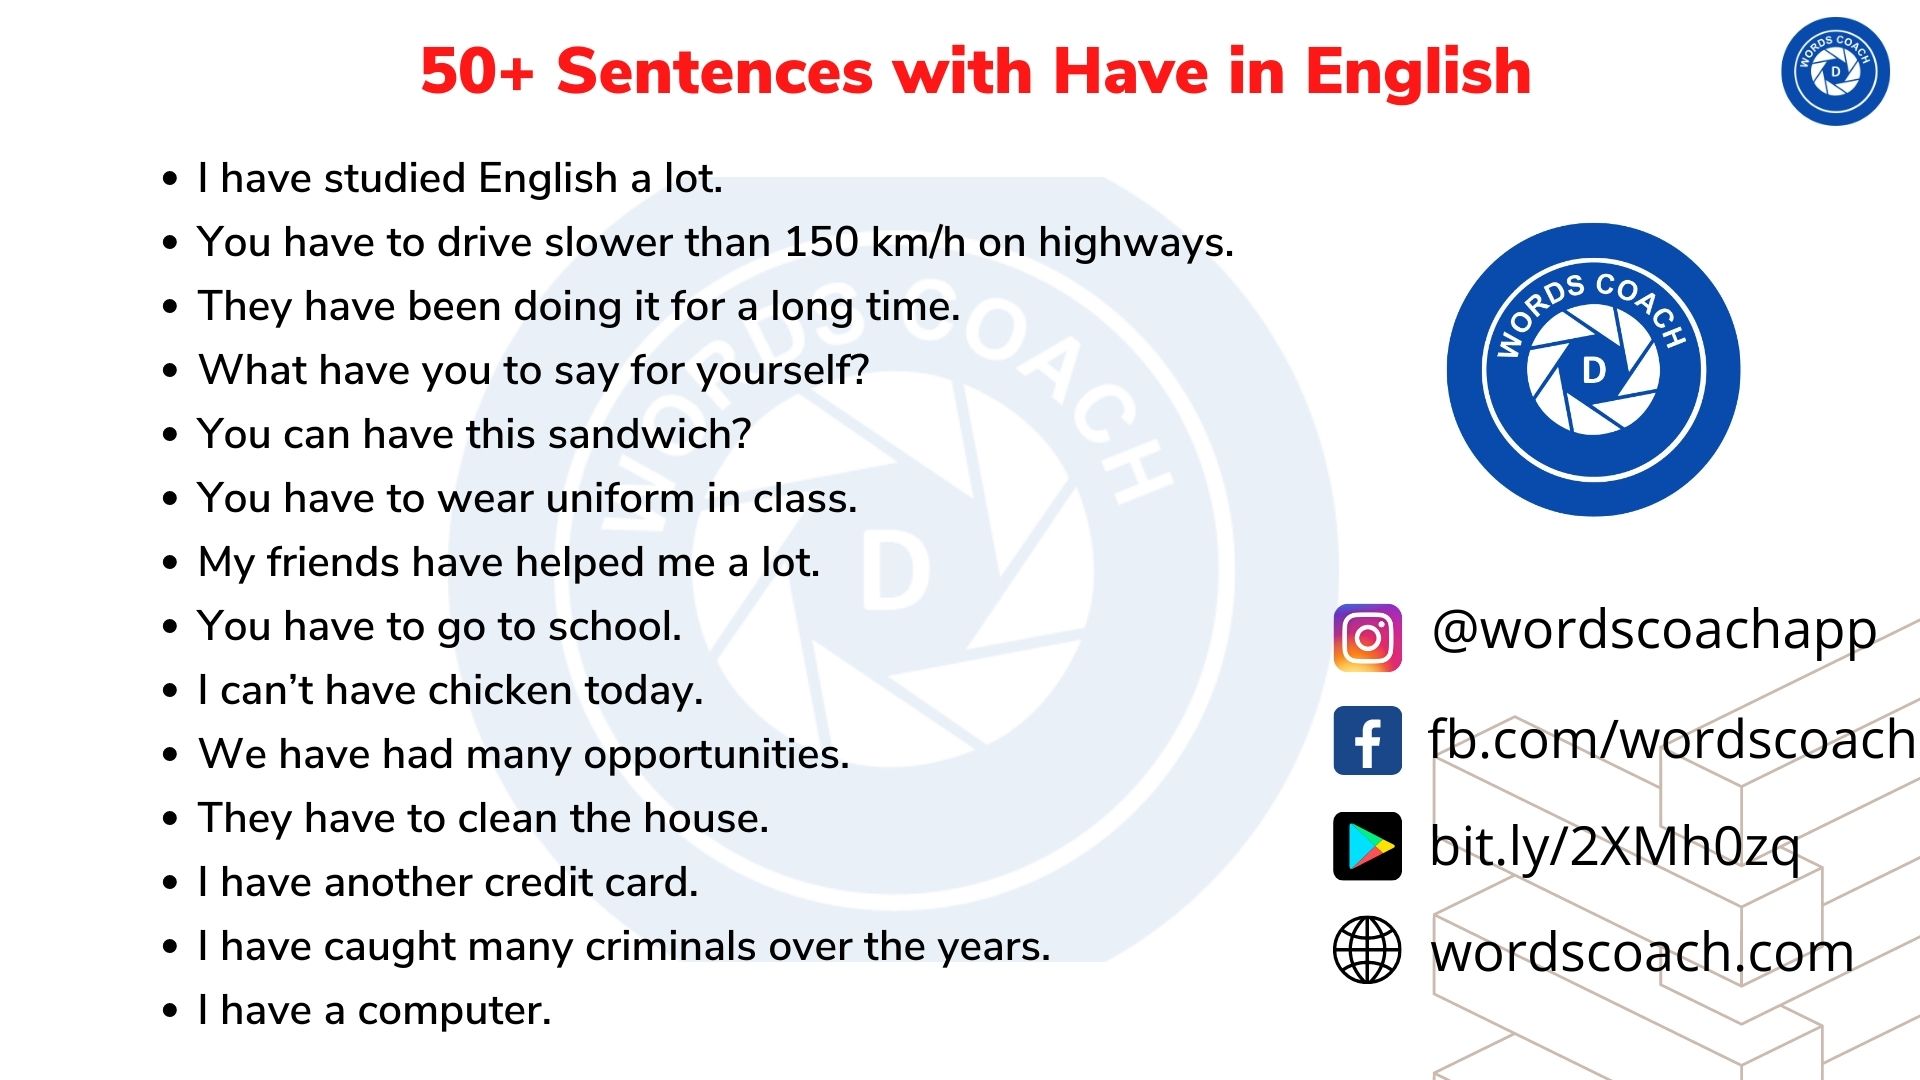 50+ Sentences with Have in English - wordscoach.com